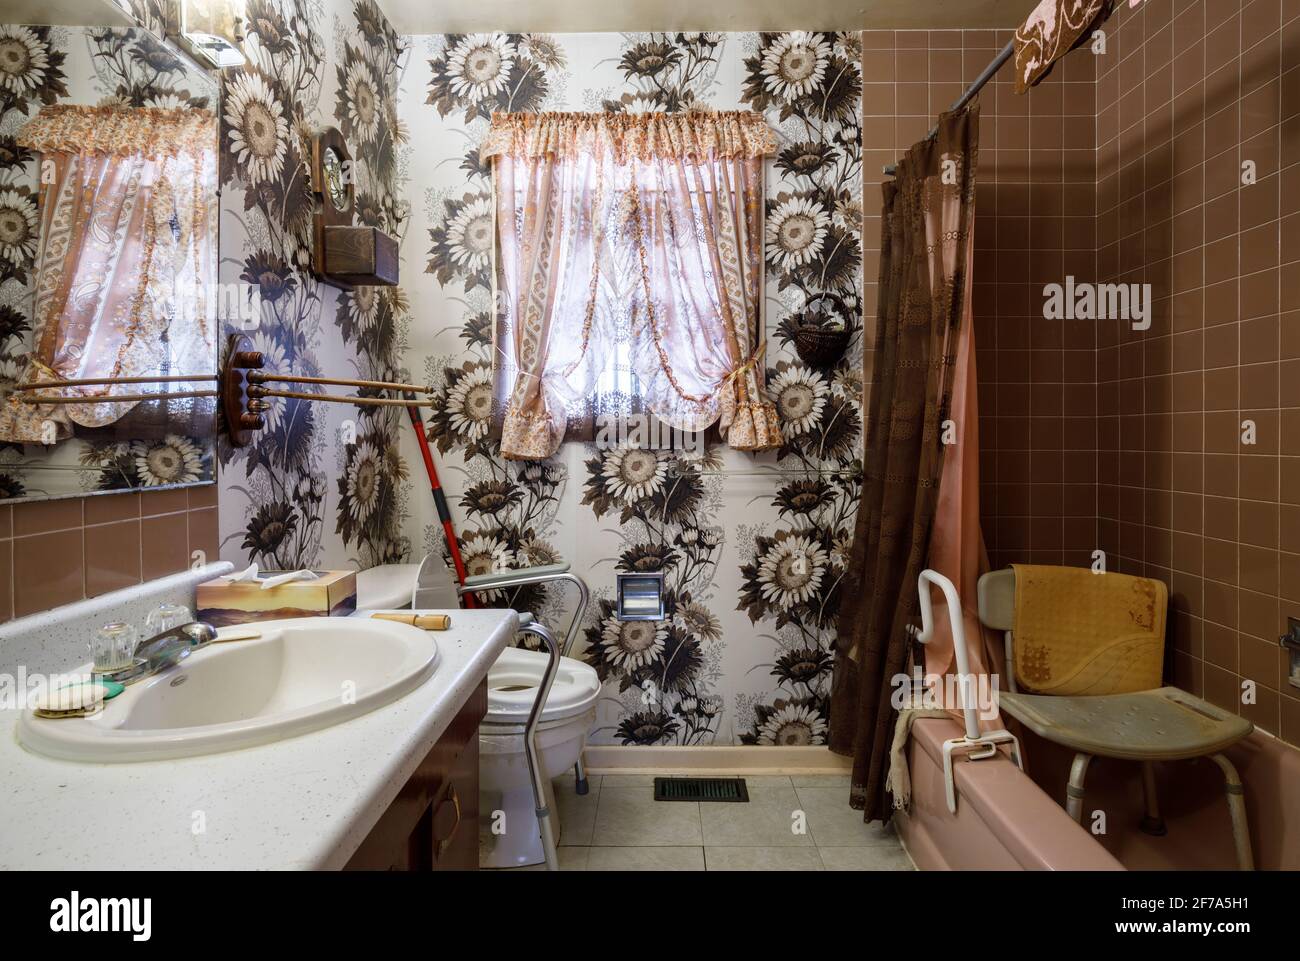 A retro bathroom with a raised toilet seat, shower chair and a grab bar used by elderly people. Stock Photo